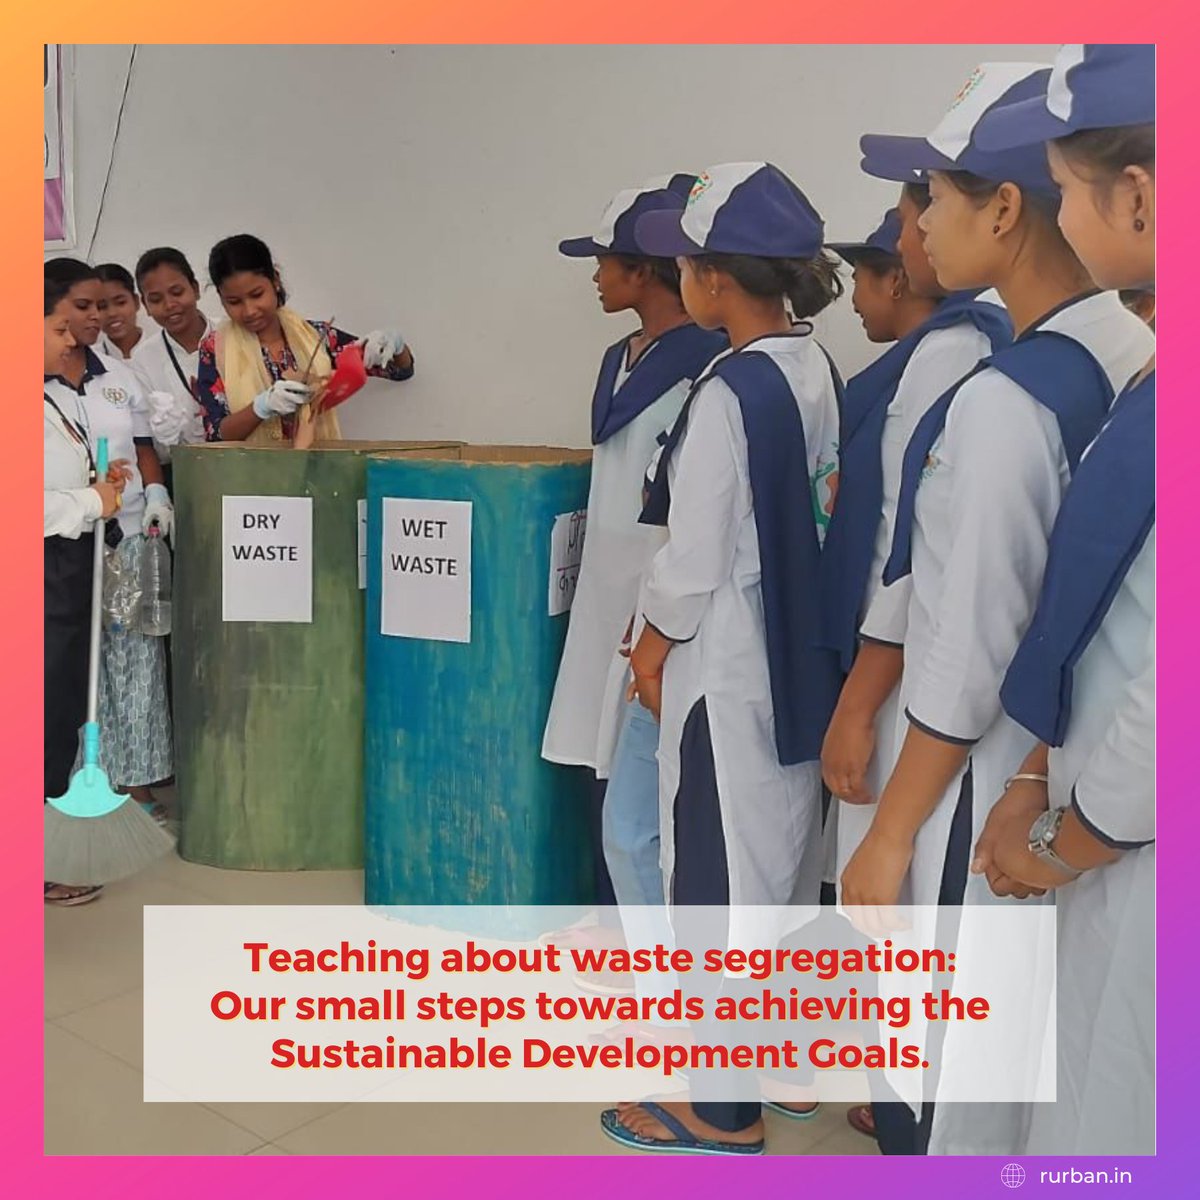 Rurban in action, embracing green learning for a sustainable future. Waste segregation leads to resource preservation, pollution reduction, and a healthier planet. 🌱🌍

#Rurban #Sustainability #Wastesegregation #CleanUp #SwachhBharat #SkillDevelopment